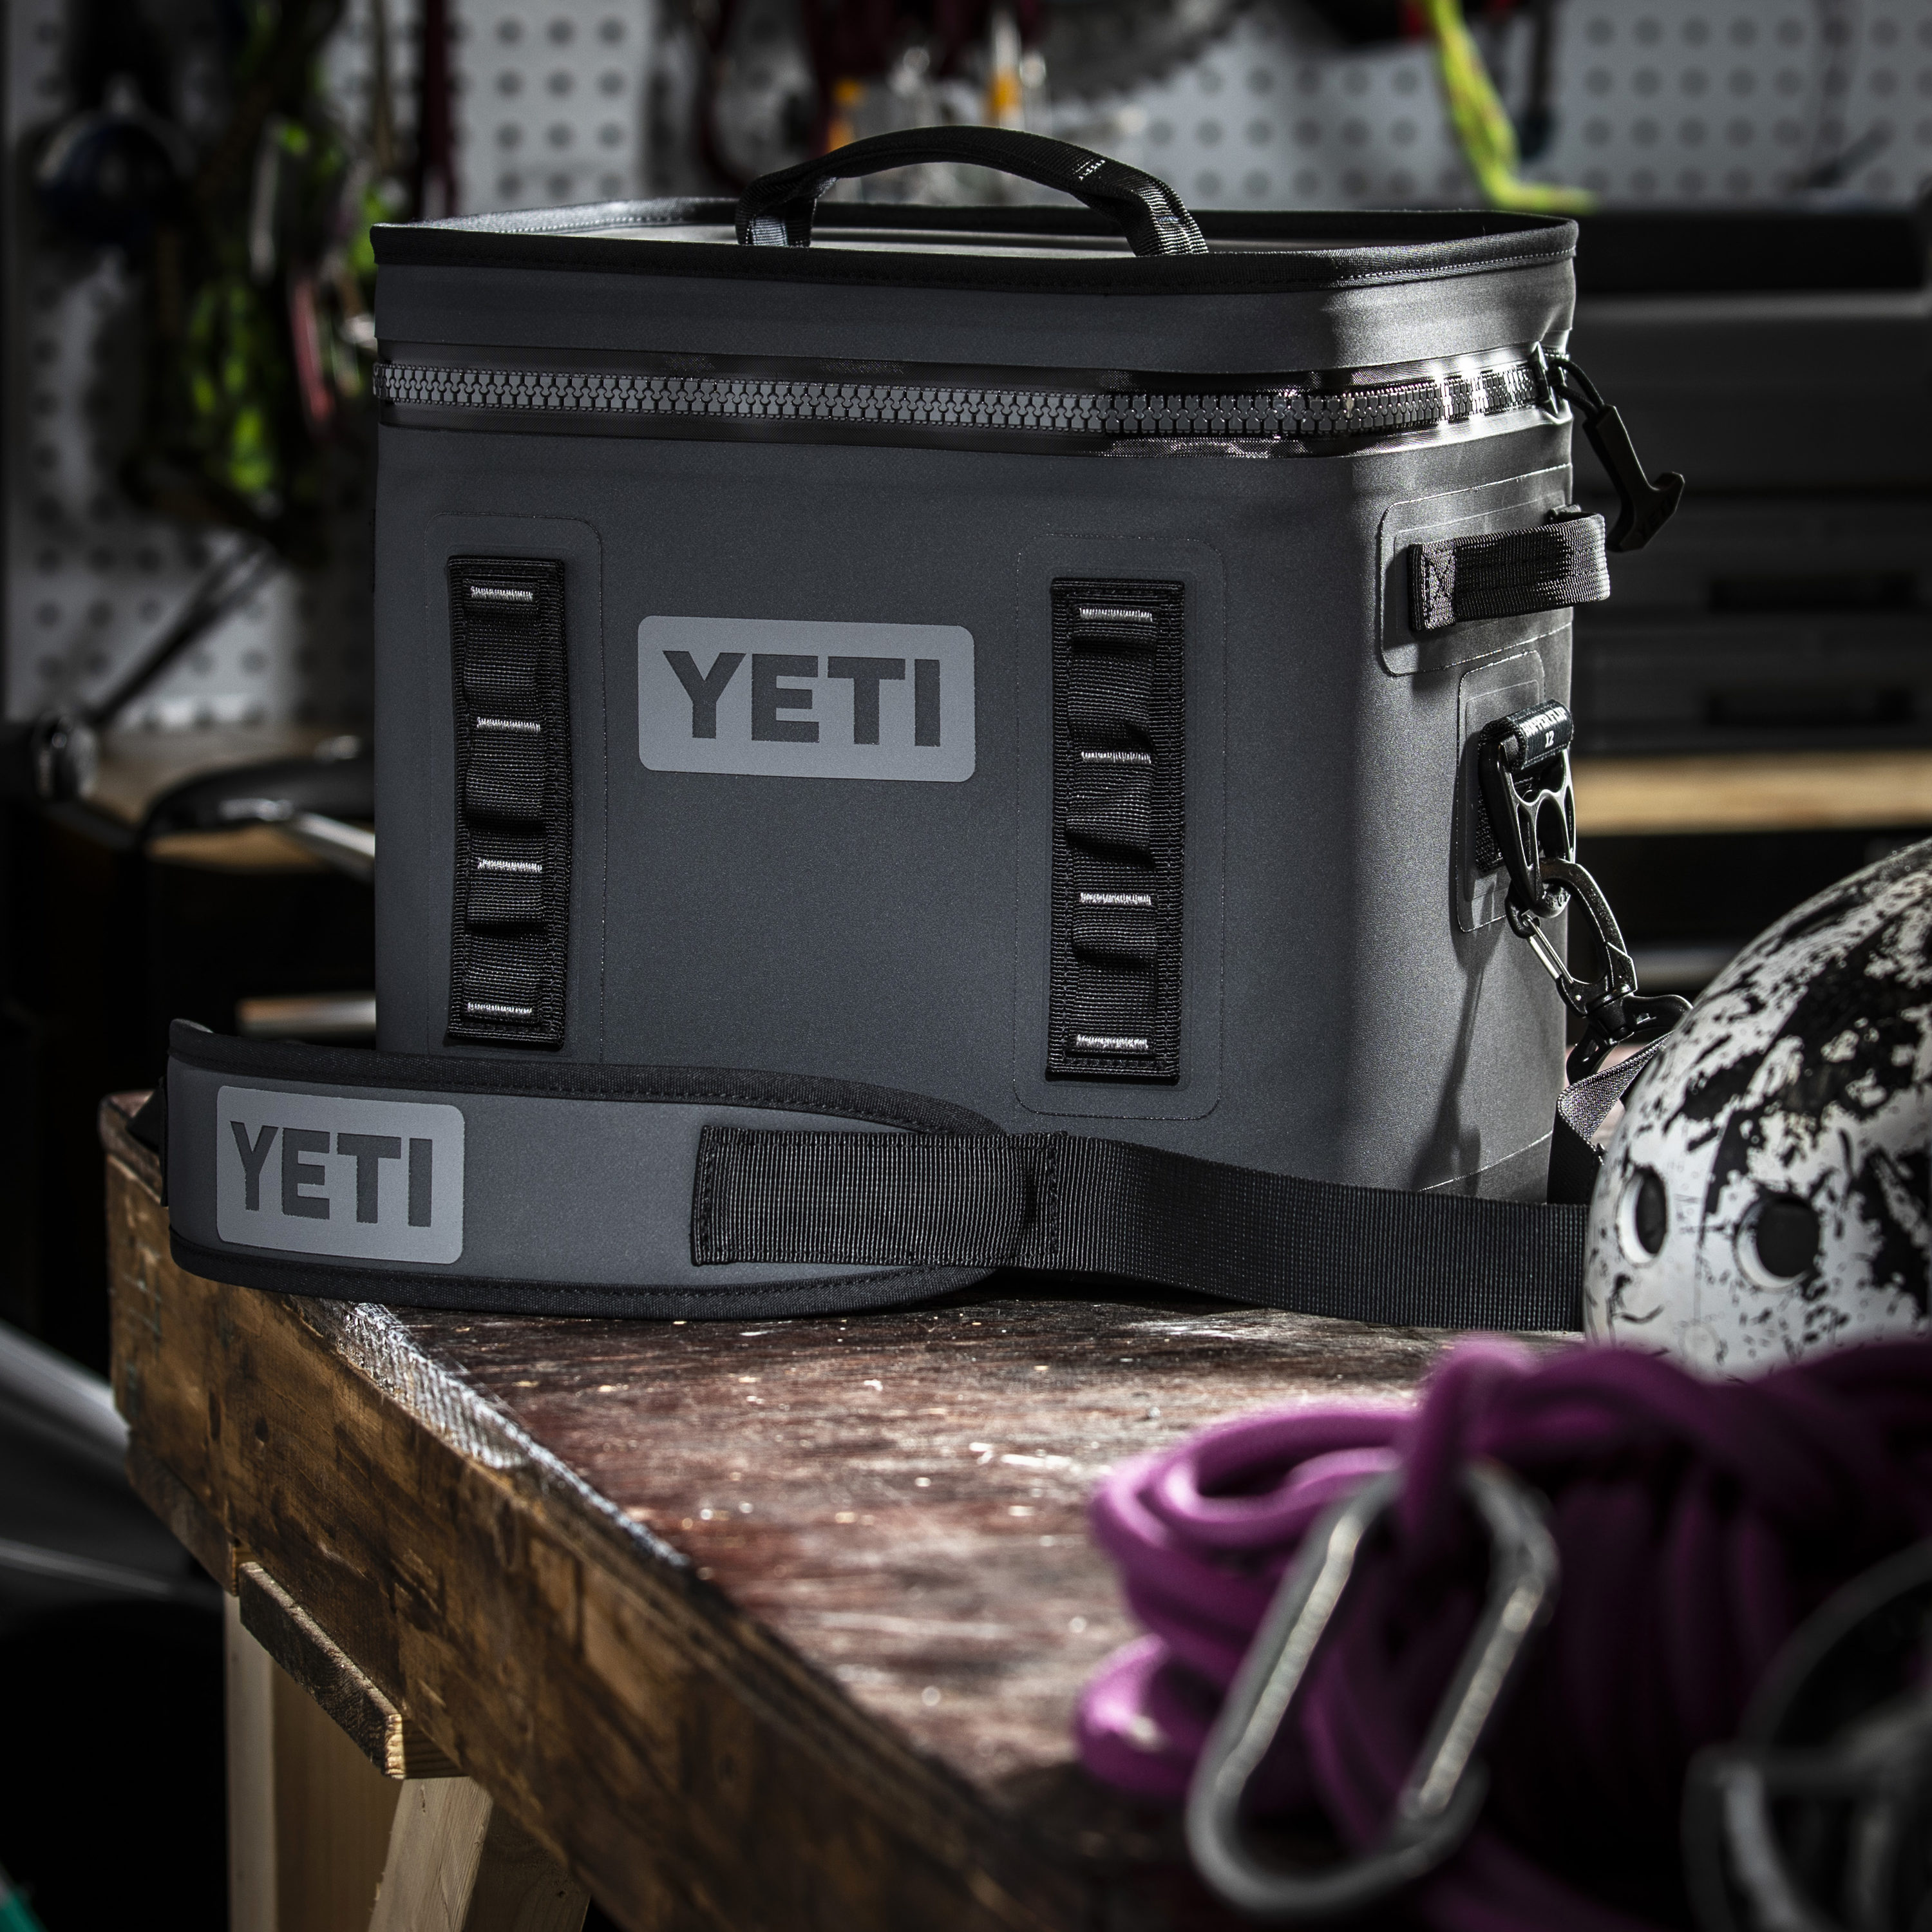 YETI Hopper Flip 12 Insulated Personal Cooler, Charcoal